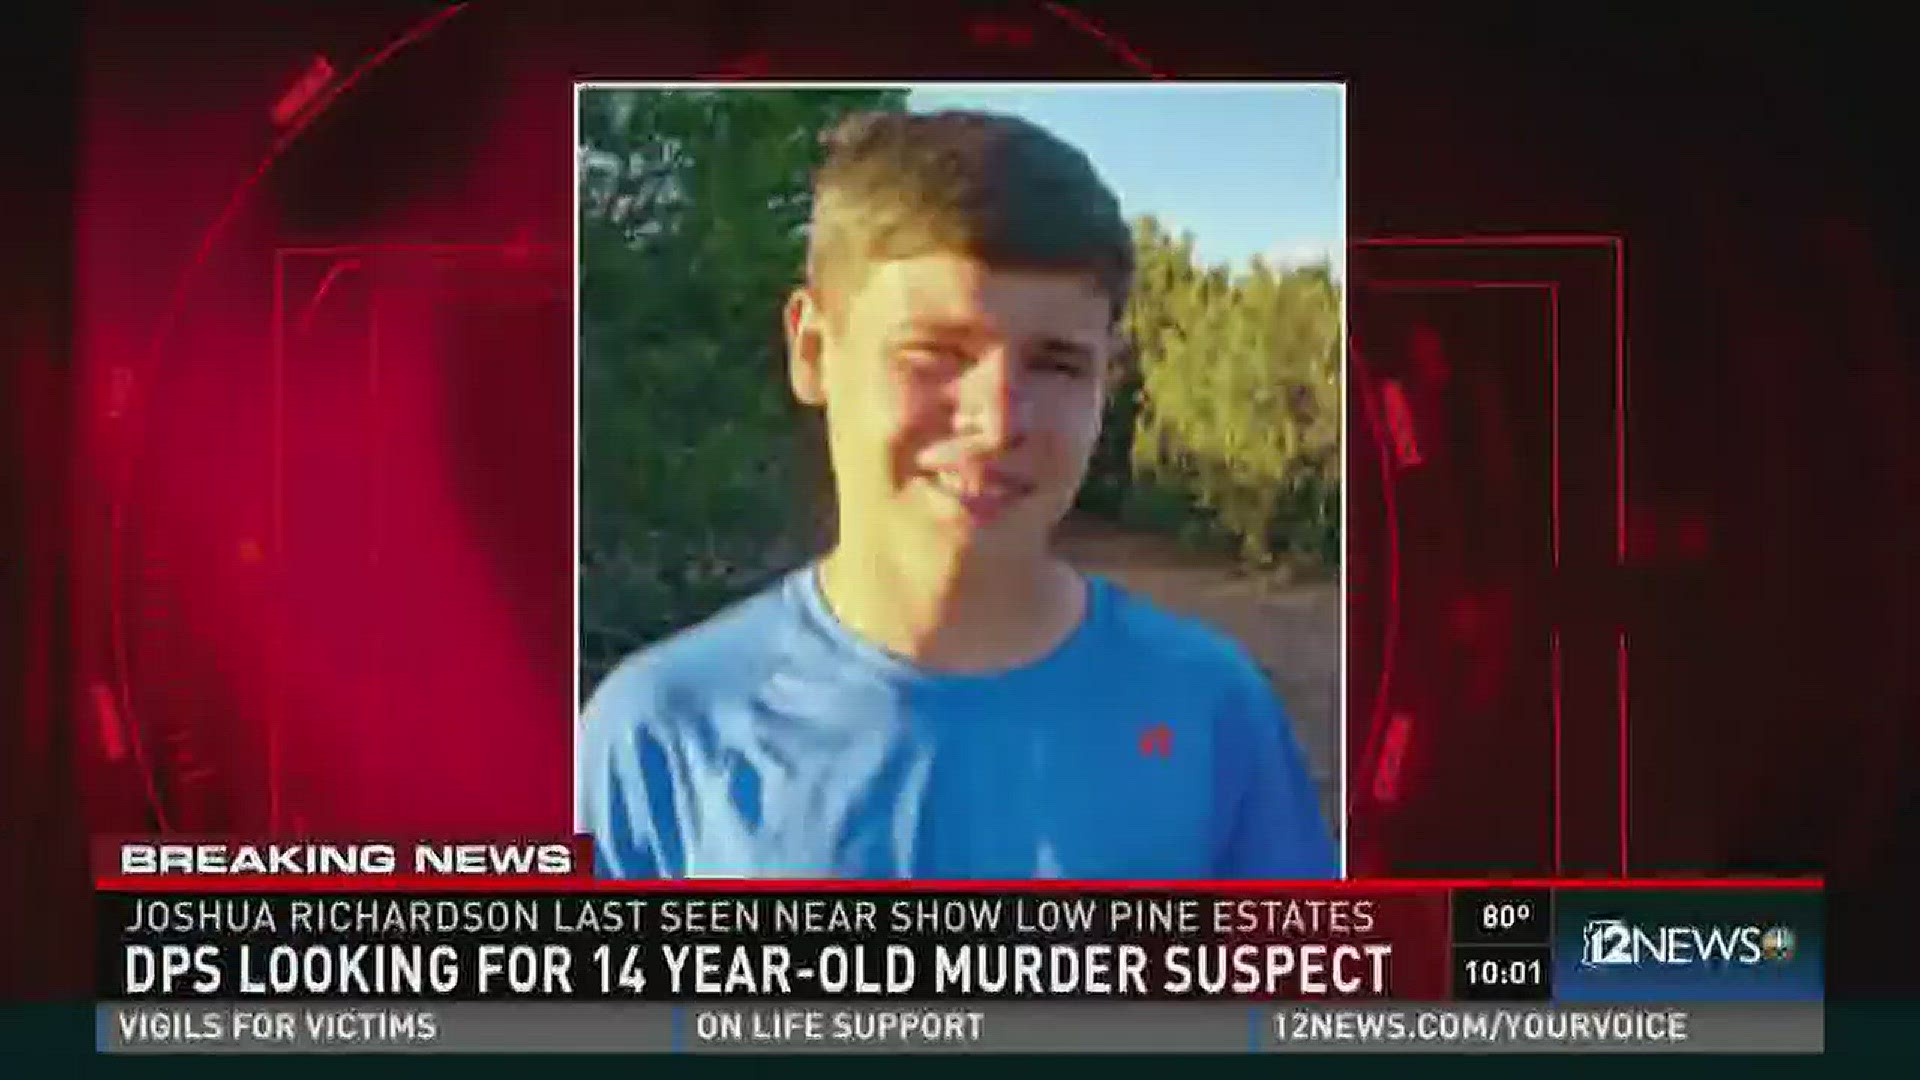 Police are searching for a 14-year-old alleged homicide suspect near Show Low Tuesday night.